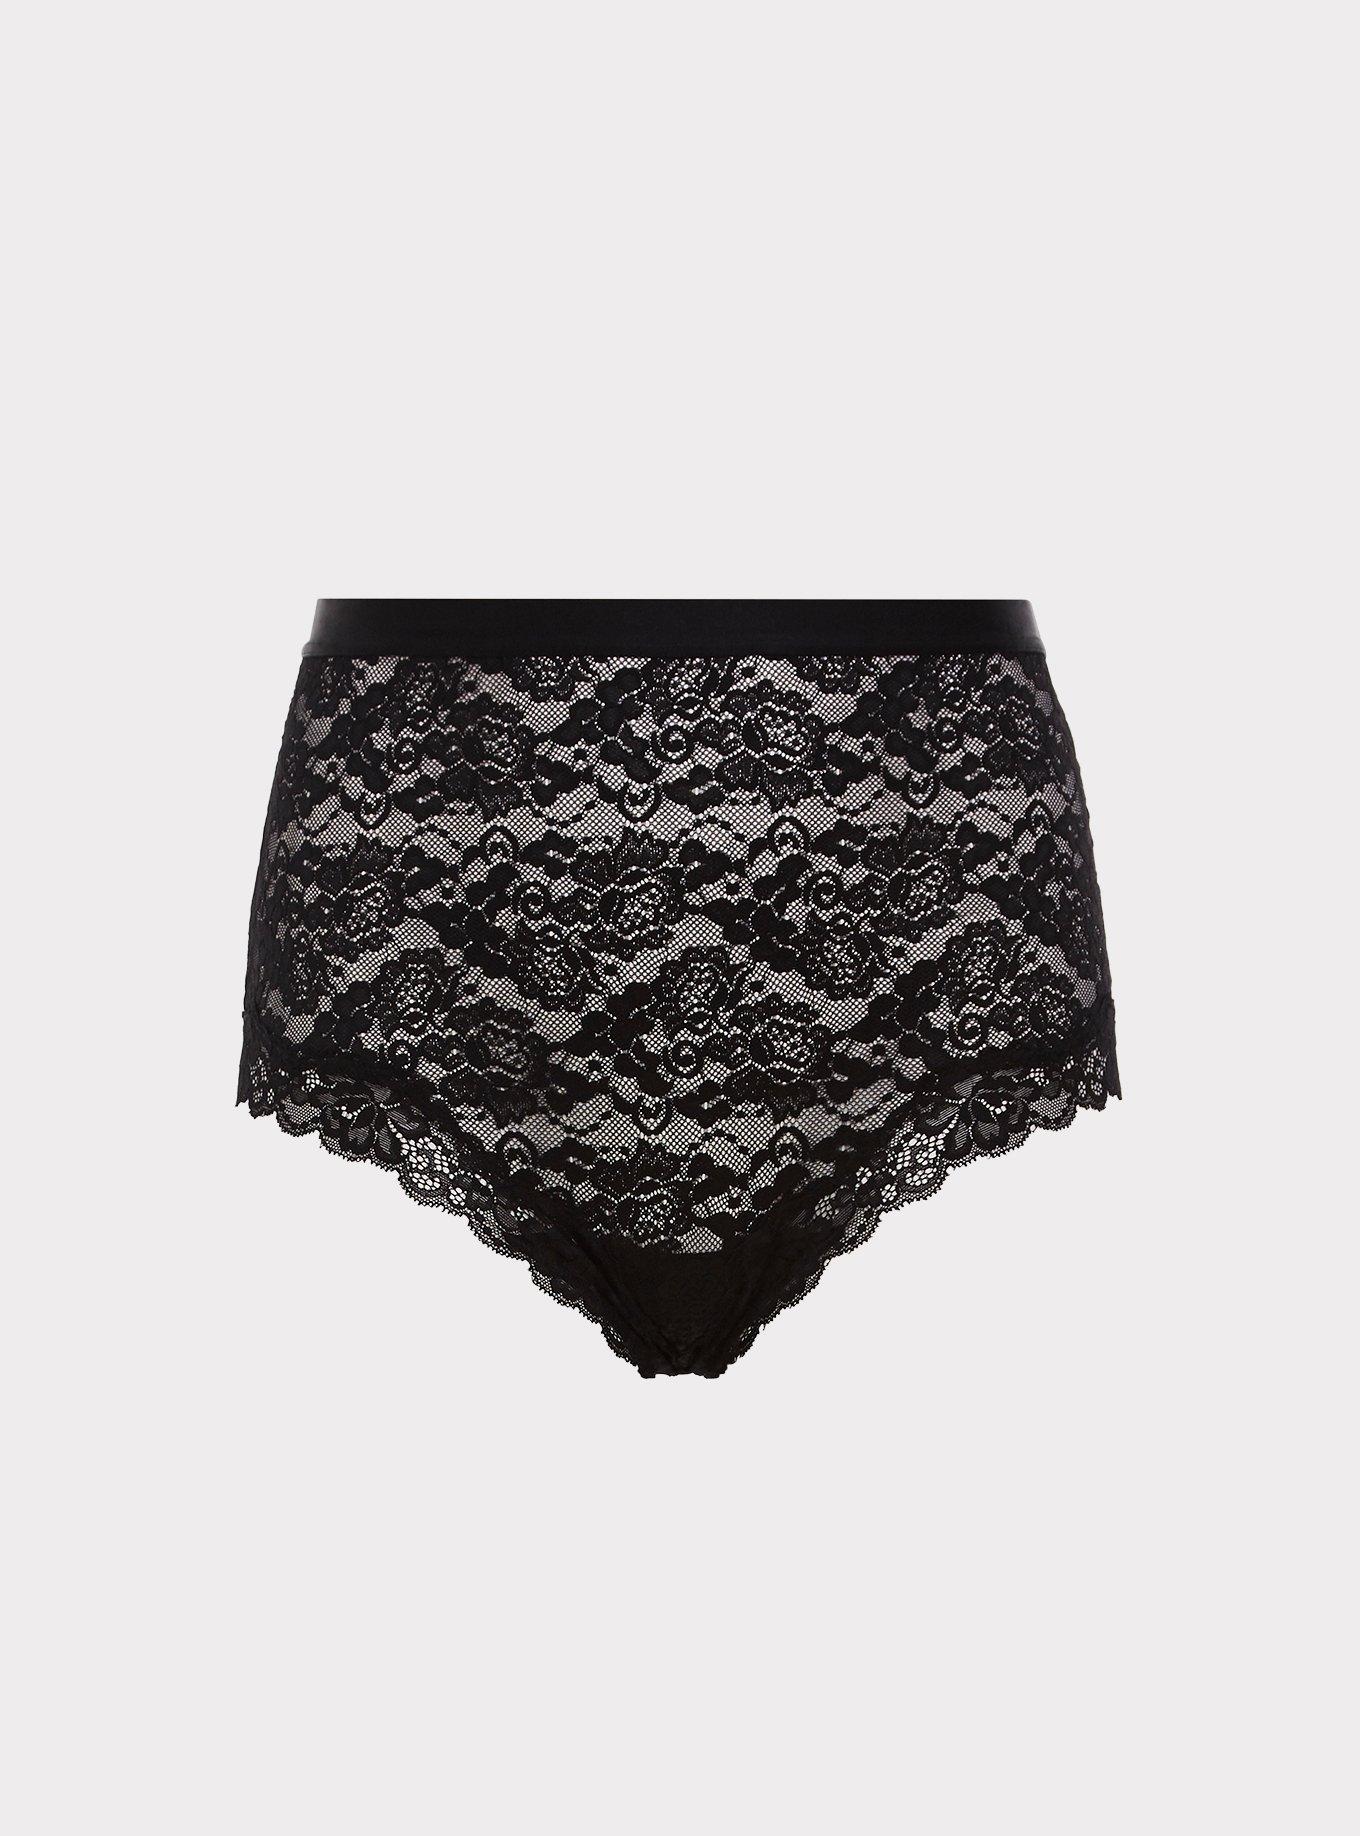 Cotton and Lace Band Cheeky Panty - Black